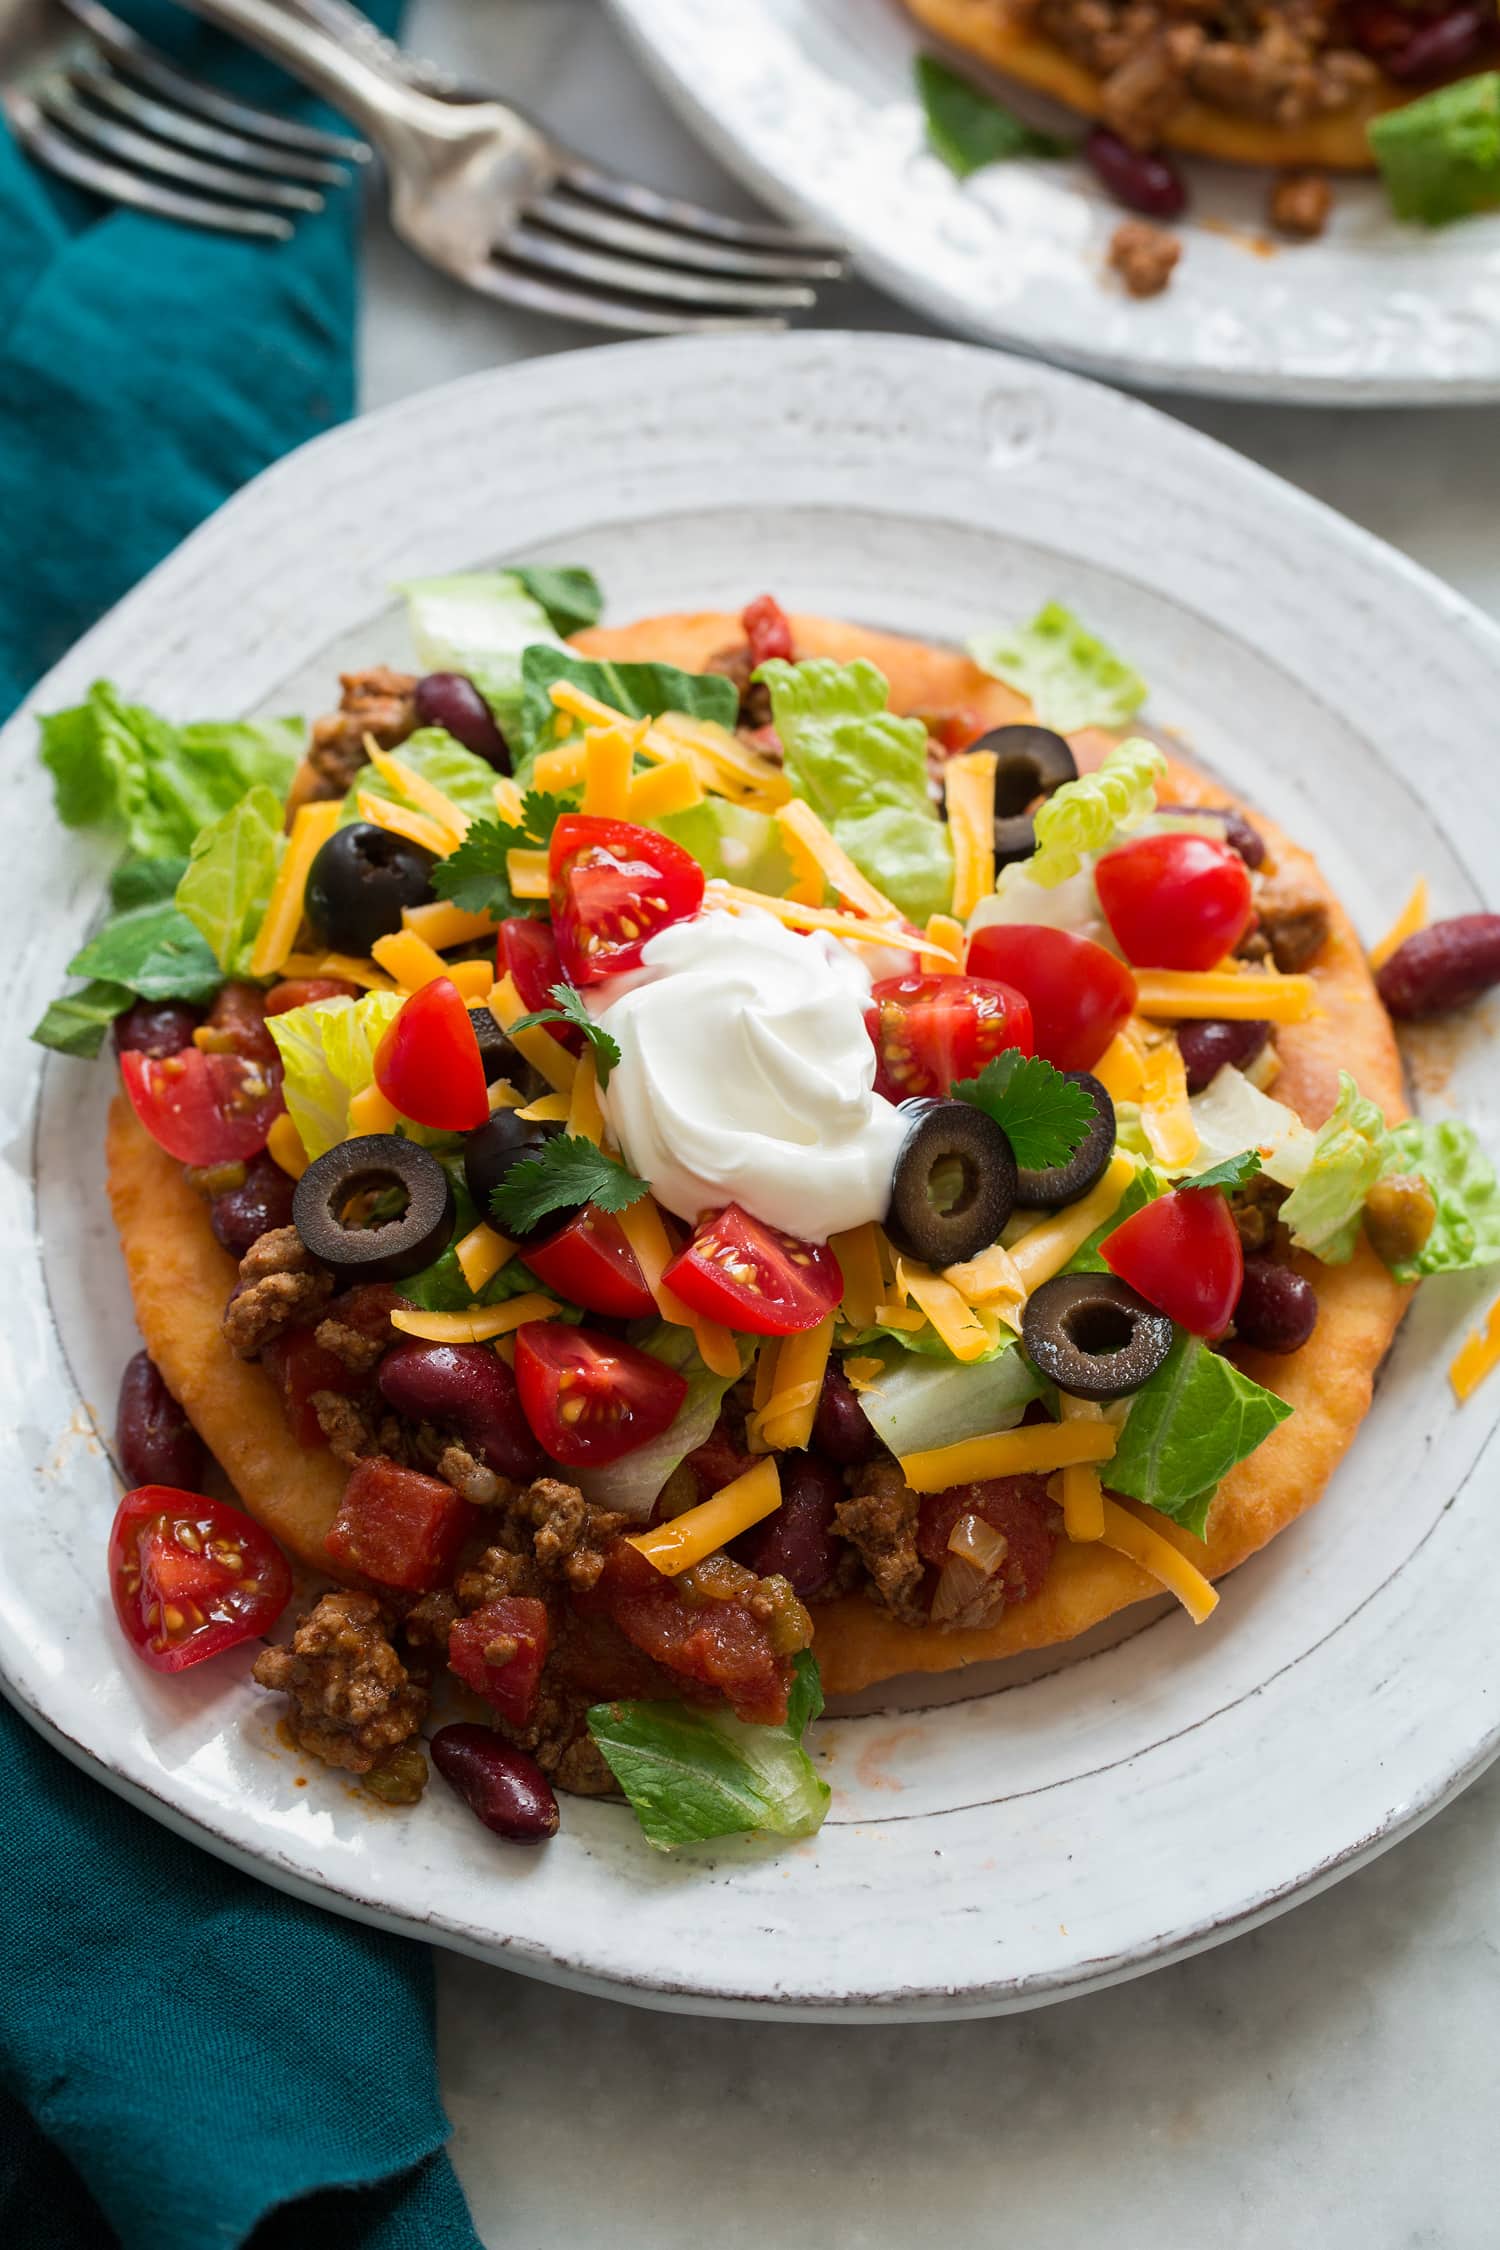 Homemade navajo taco on a plate. Made with homemade fry bread, ground beef and bean filling, lettuce, tomatoes, olives and sour cream.